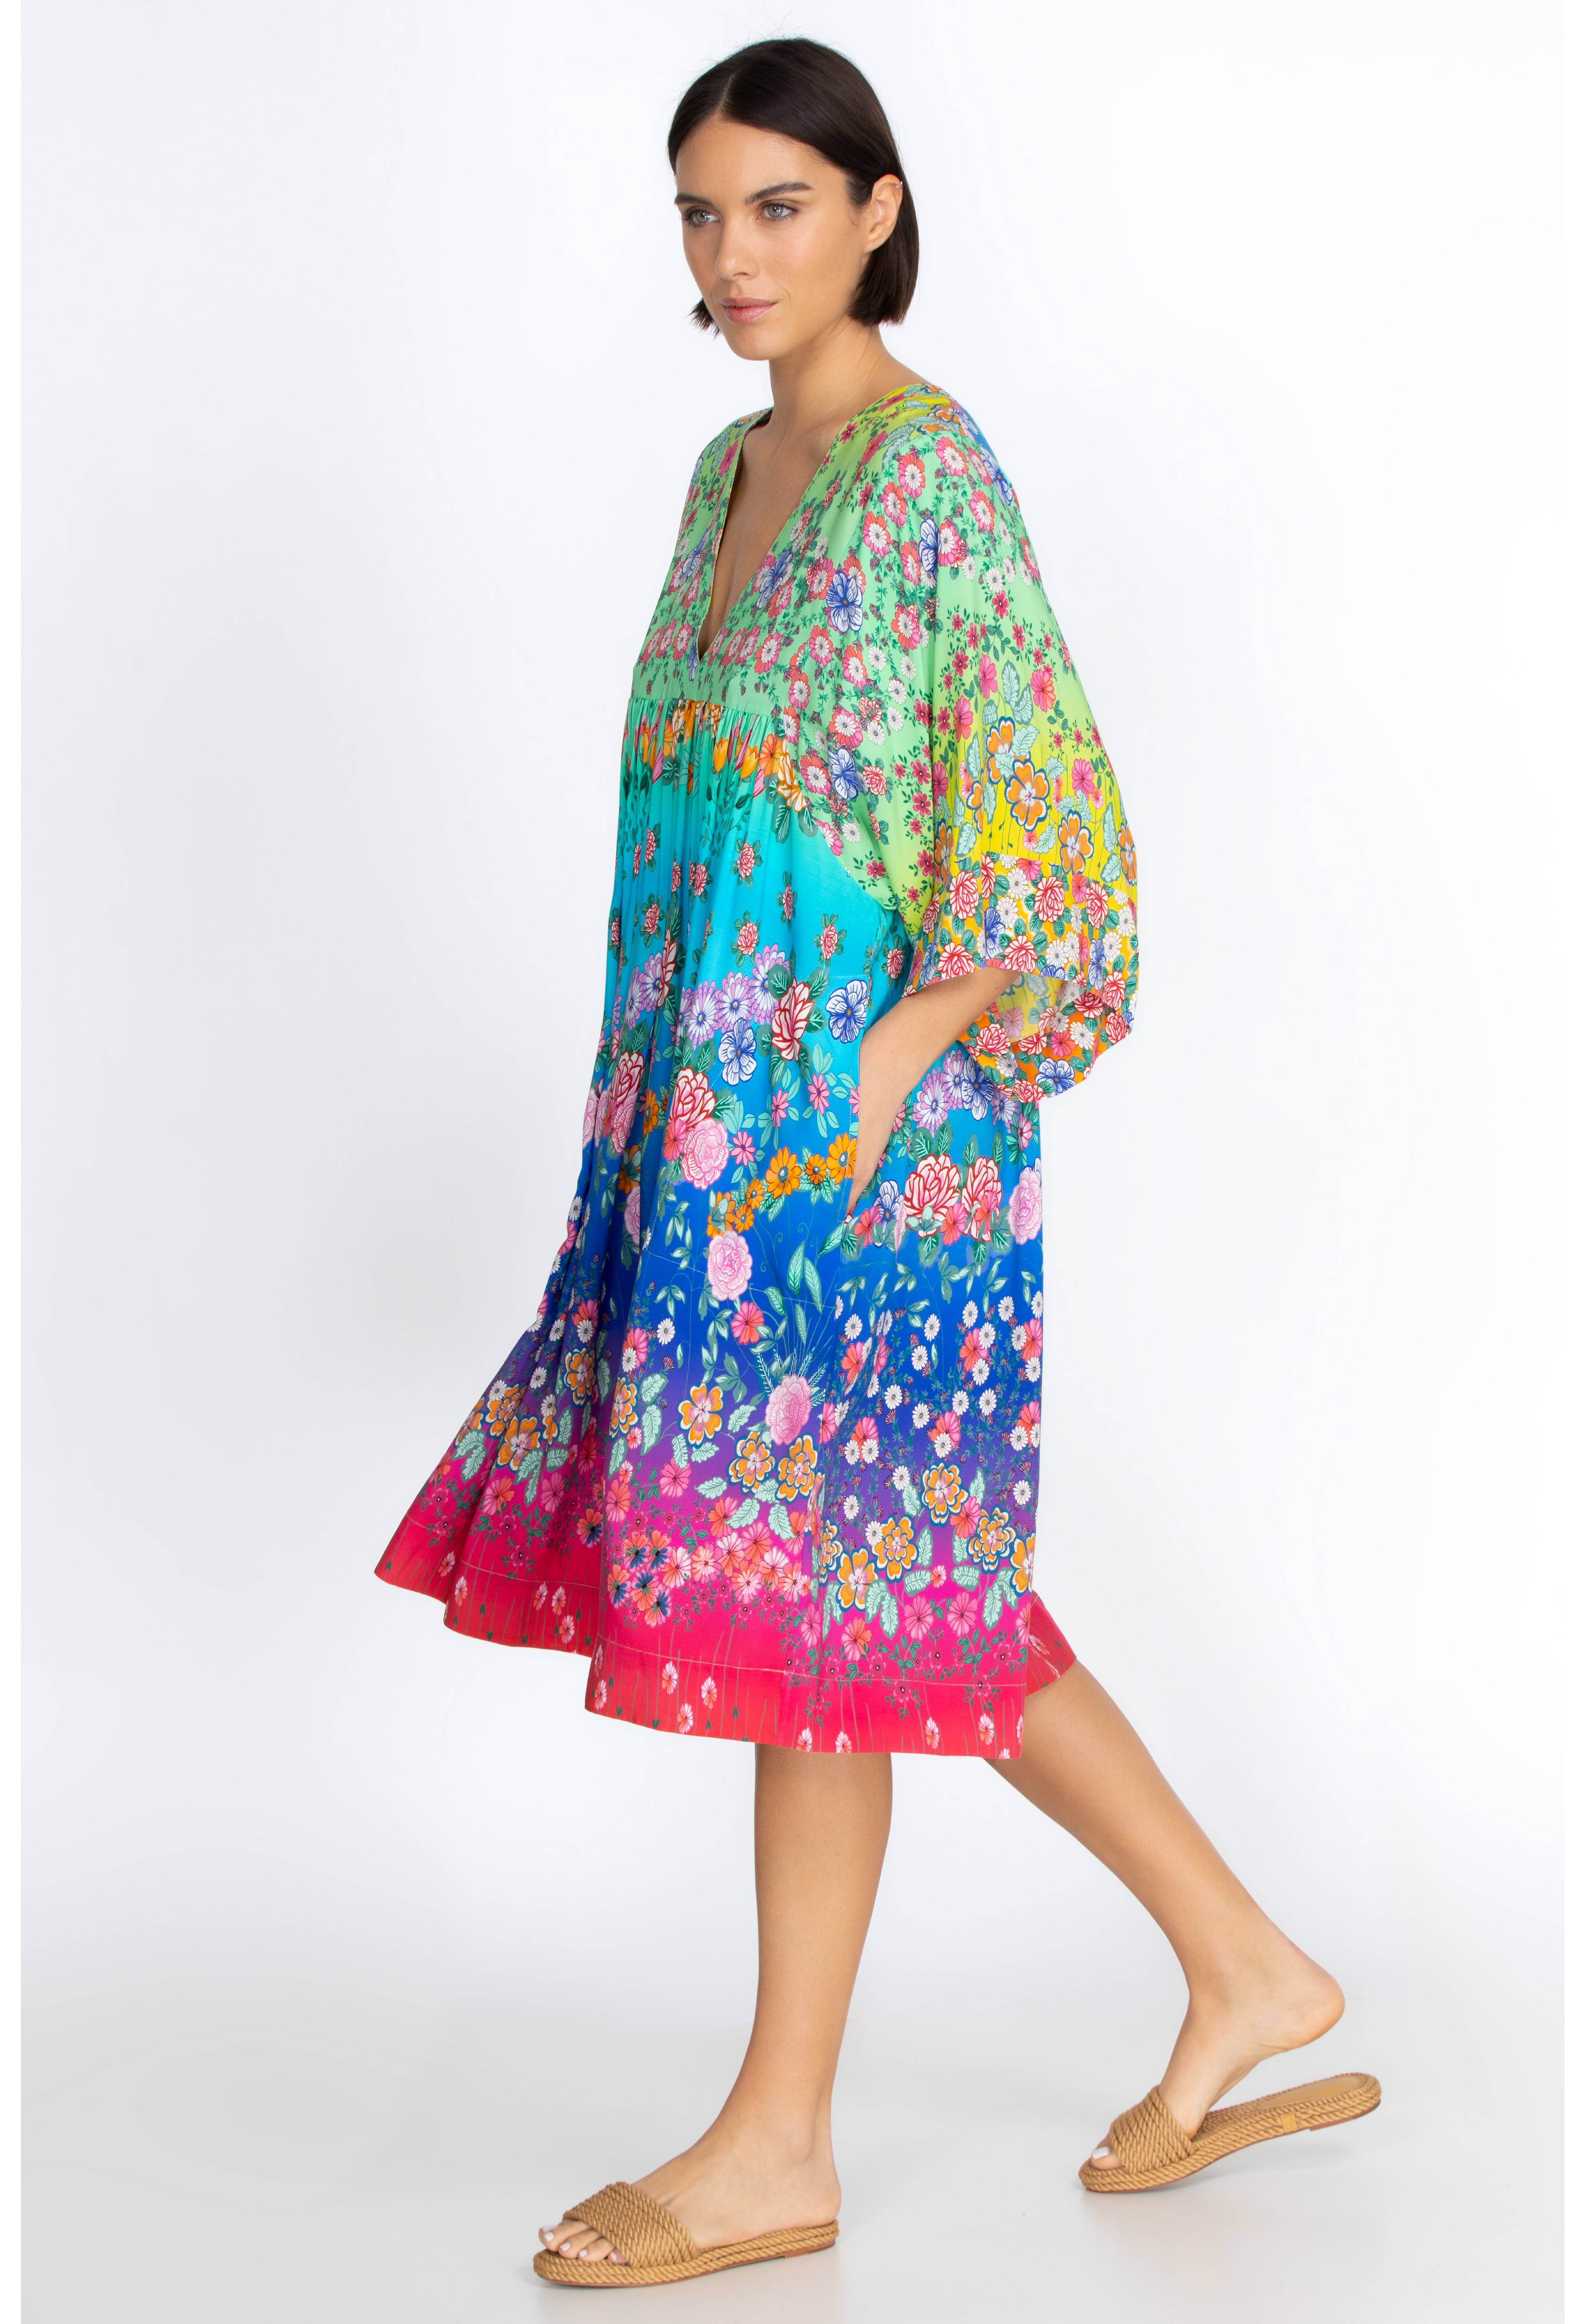 Rainbow Easy Cover-Up Dress, , large image number 3